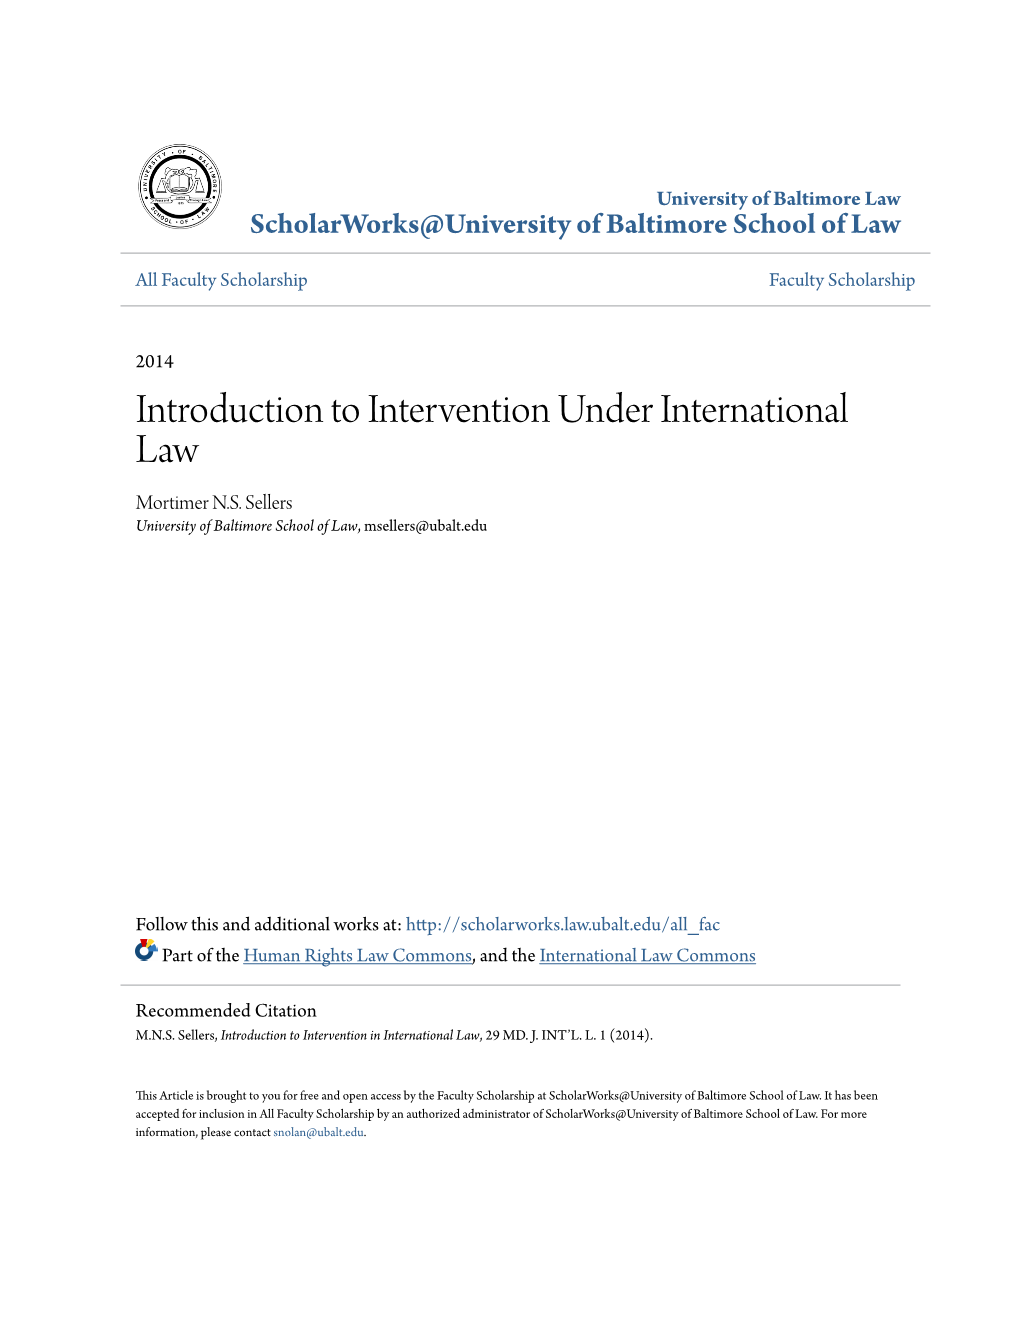 Introduction to Intervention Under International Law Mortimer N.S